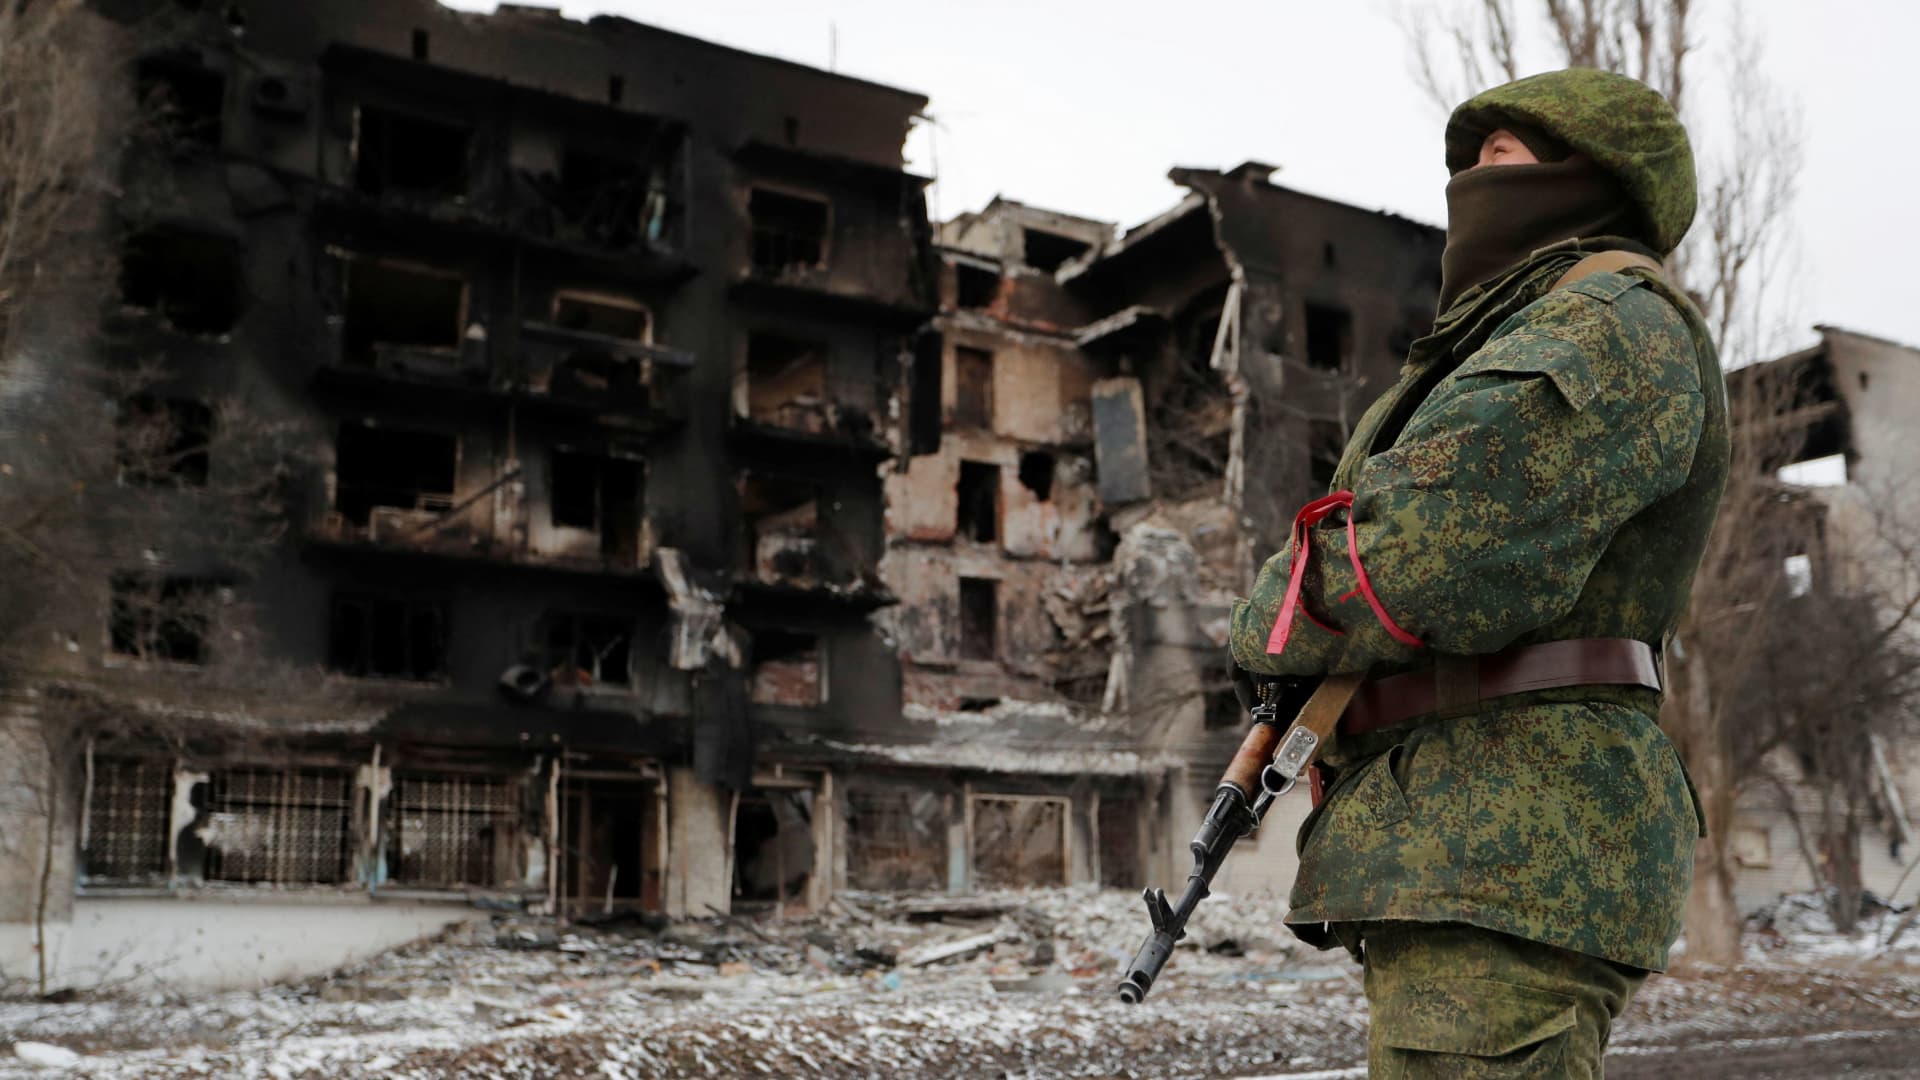 A service member of pro-Russian troops in uniform without insignia stands near a residential building which was heavily damaged during Ukraine-Russia conflict in the separatist-controlled town of Volnovakha in the Donetsk region, Ukraine March 11, 2022.